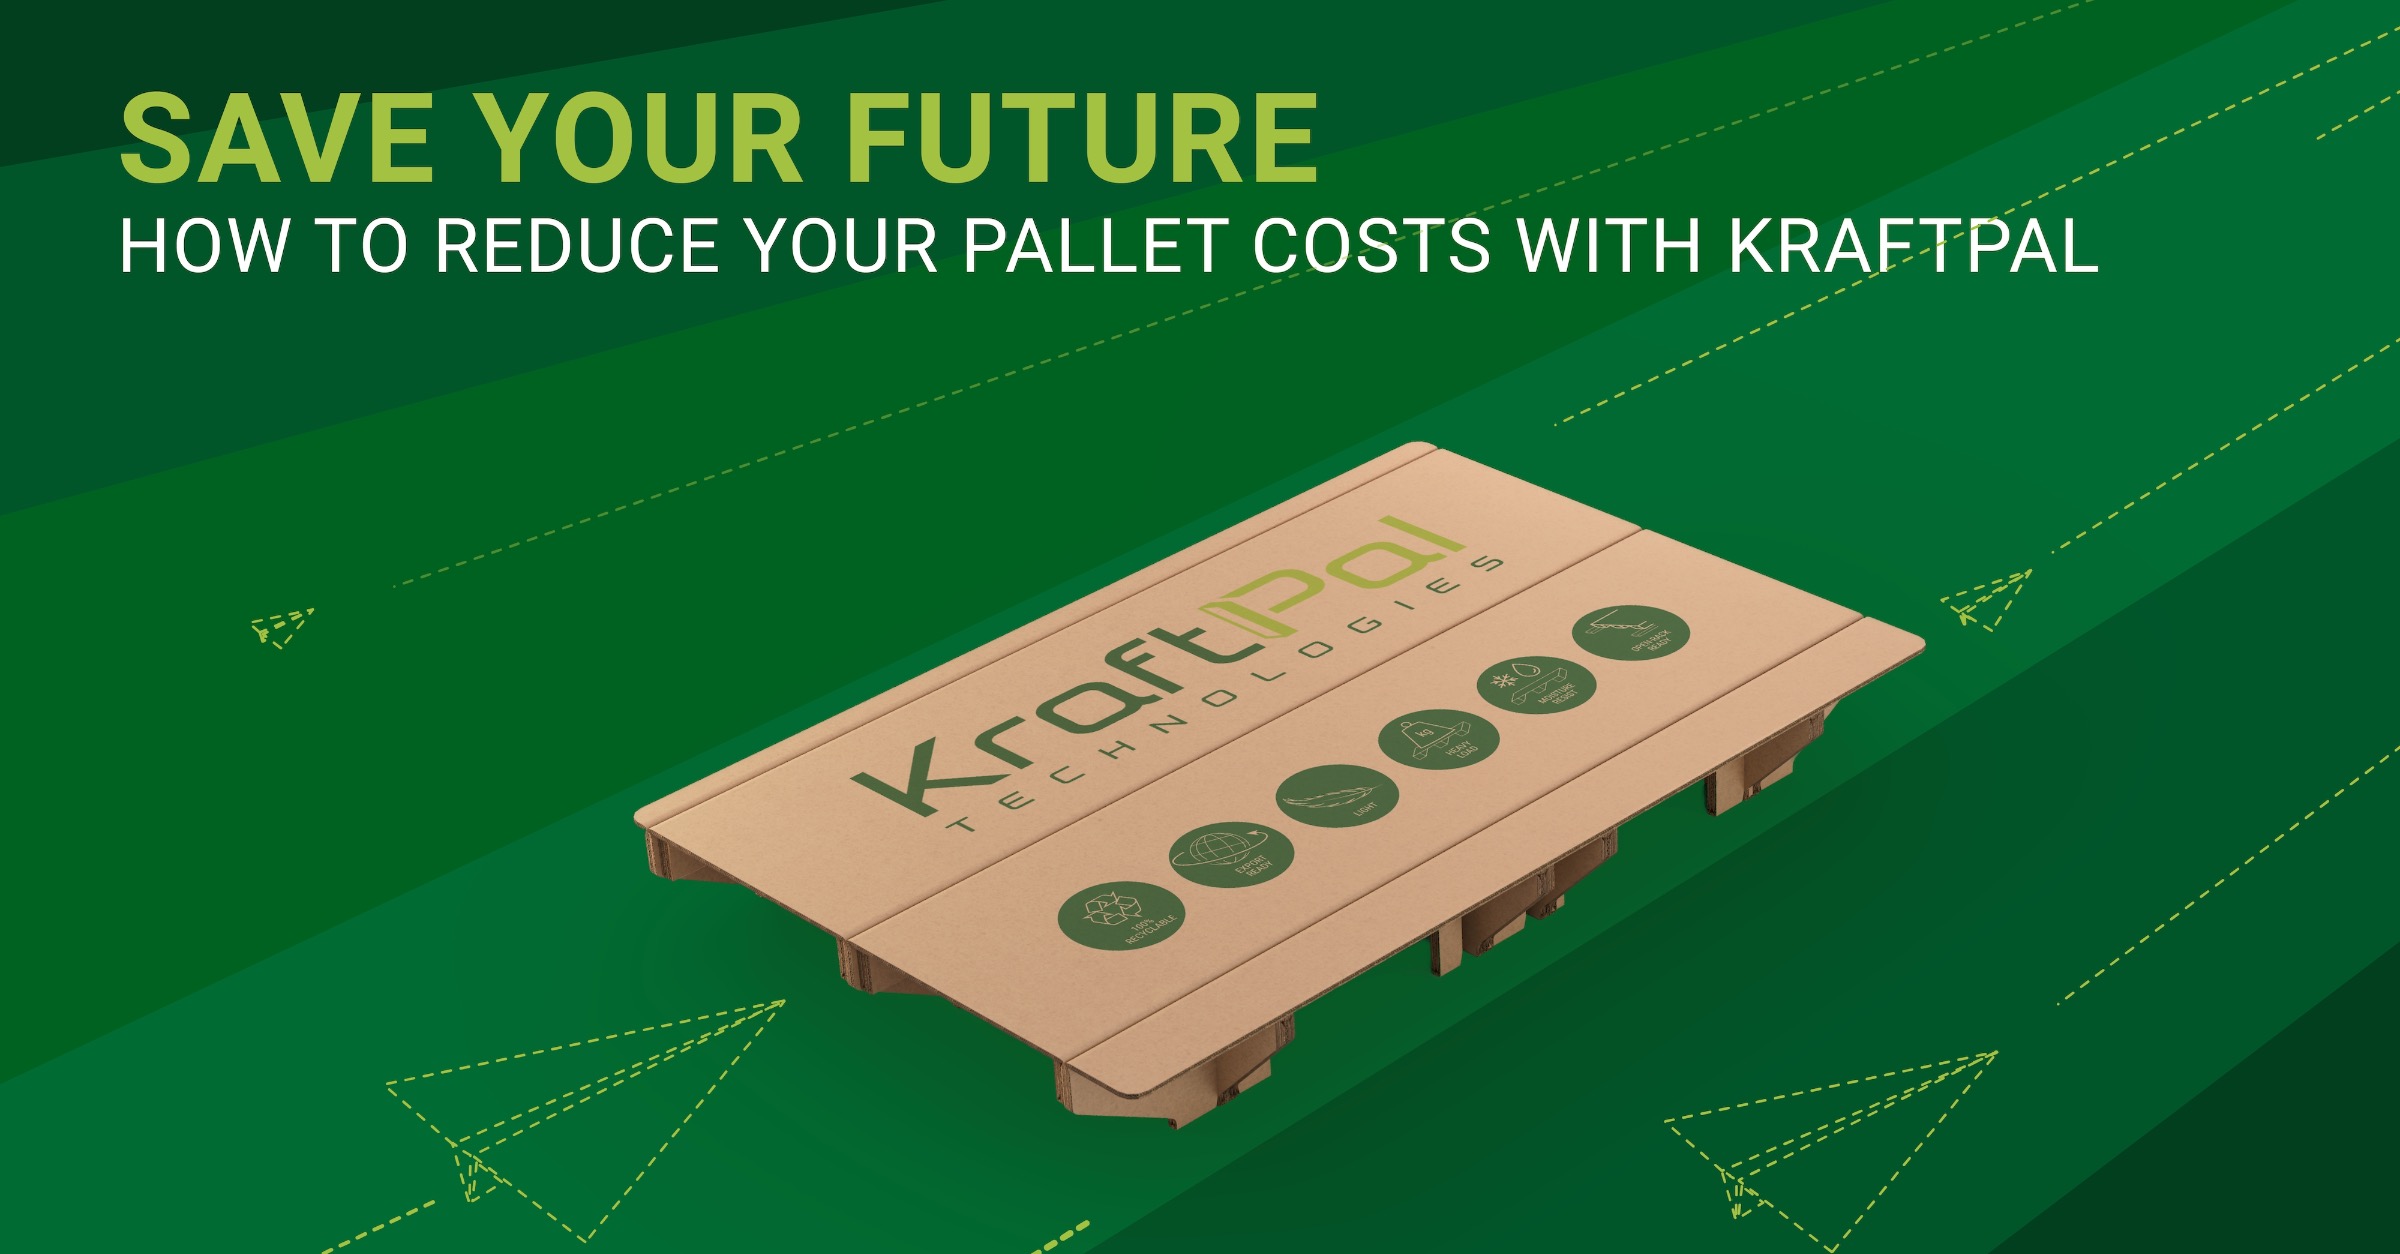 Save your Future: How to Reduce Your Pallet Costs with KraftPal